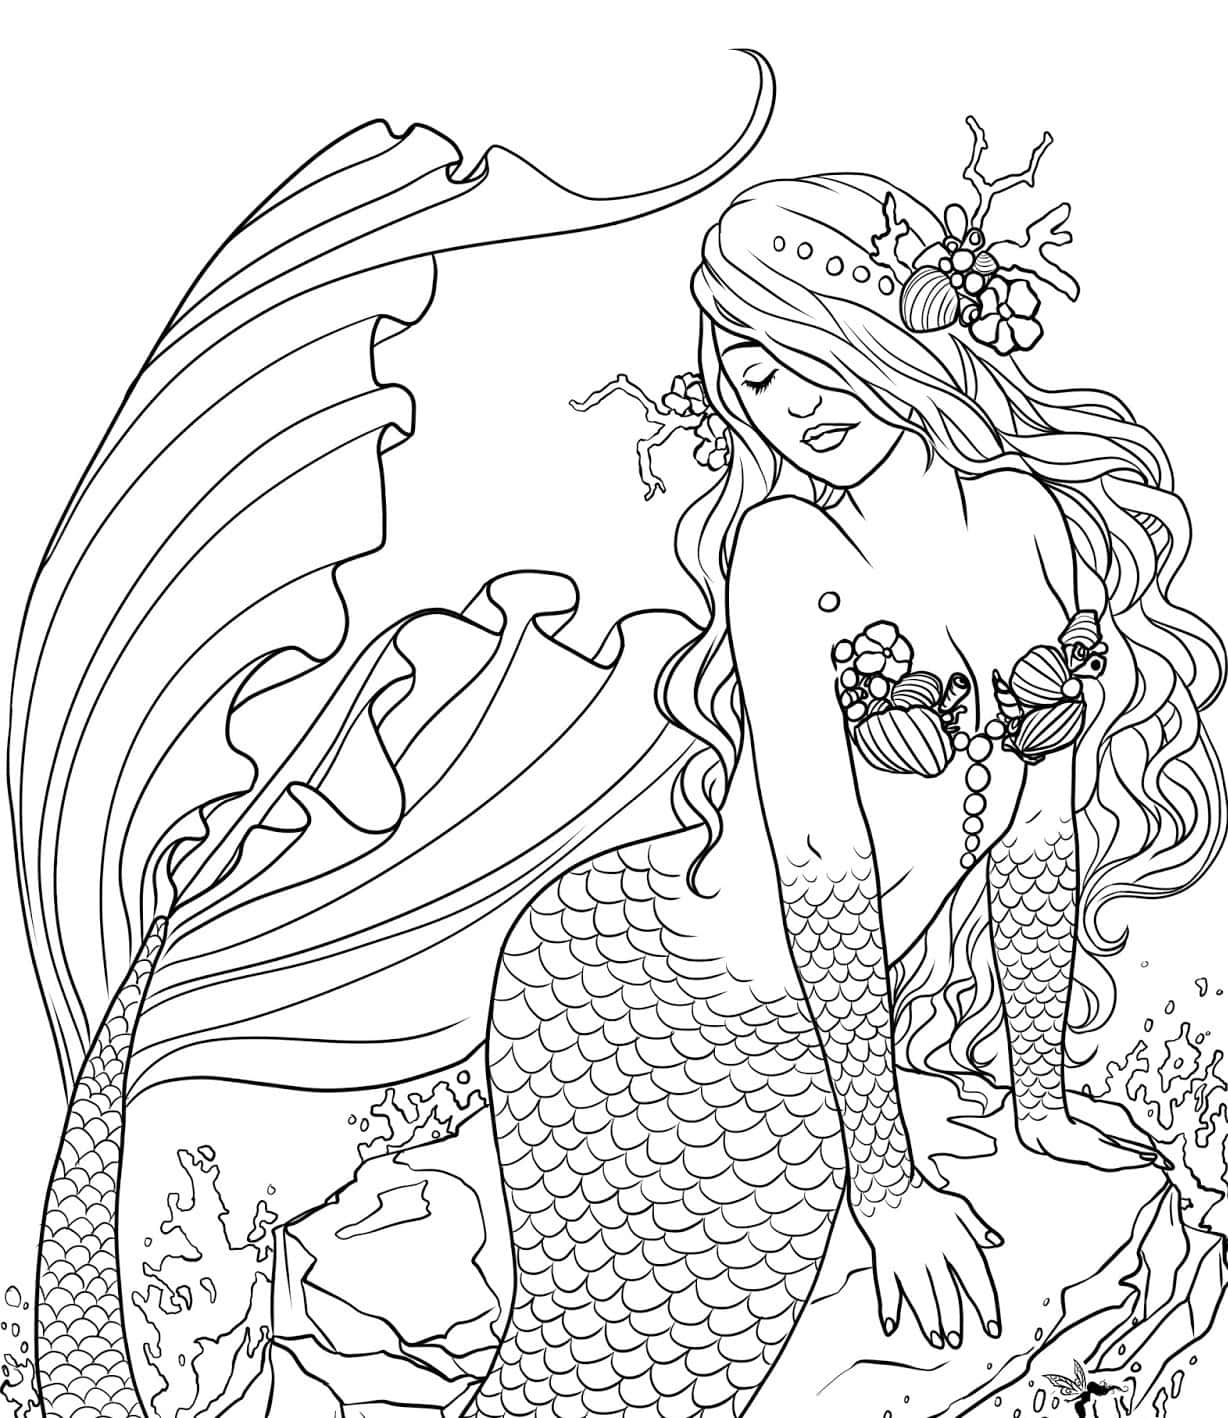 Have fun with this magical mermaid coloring page